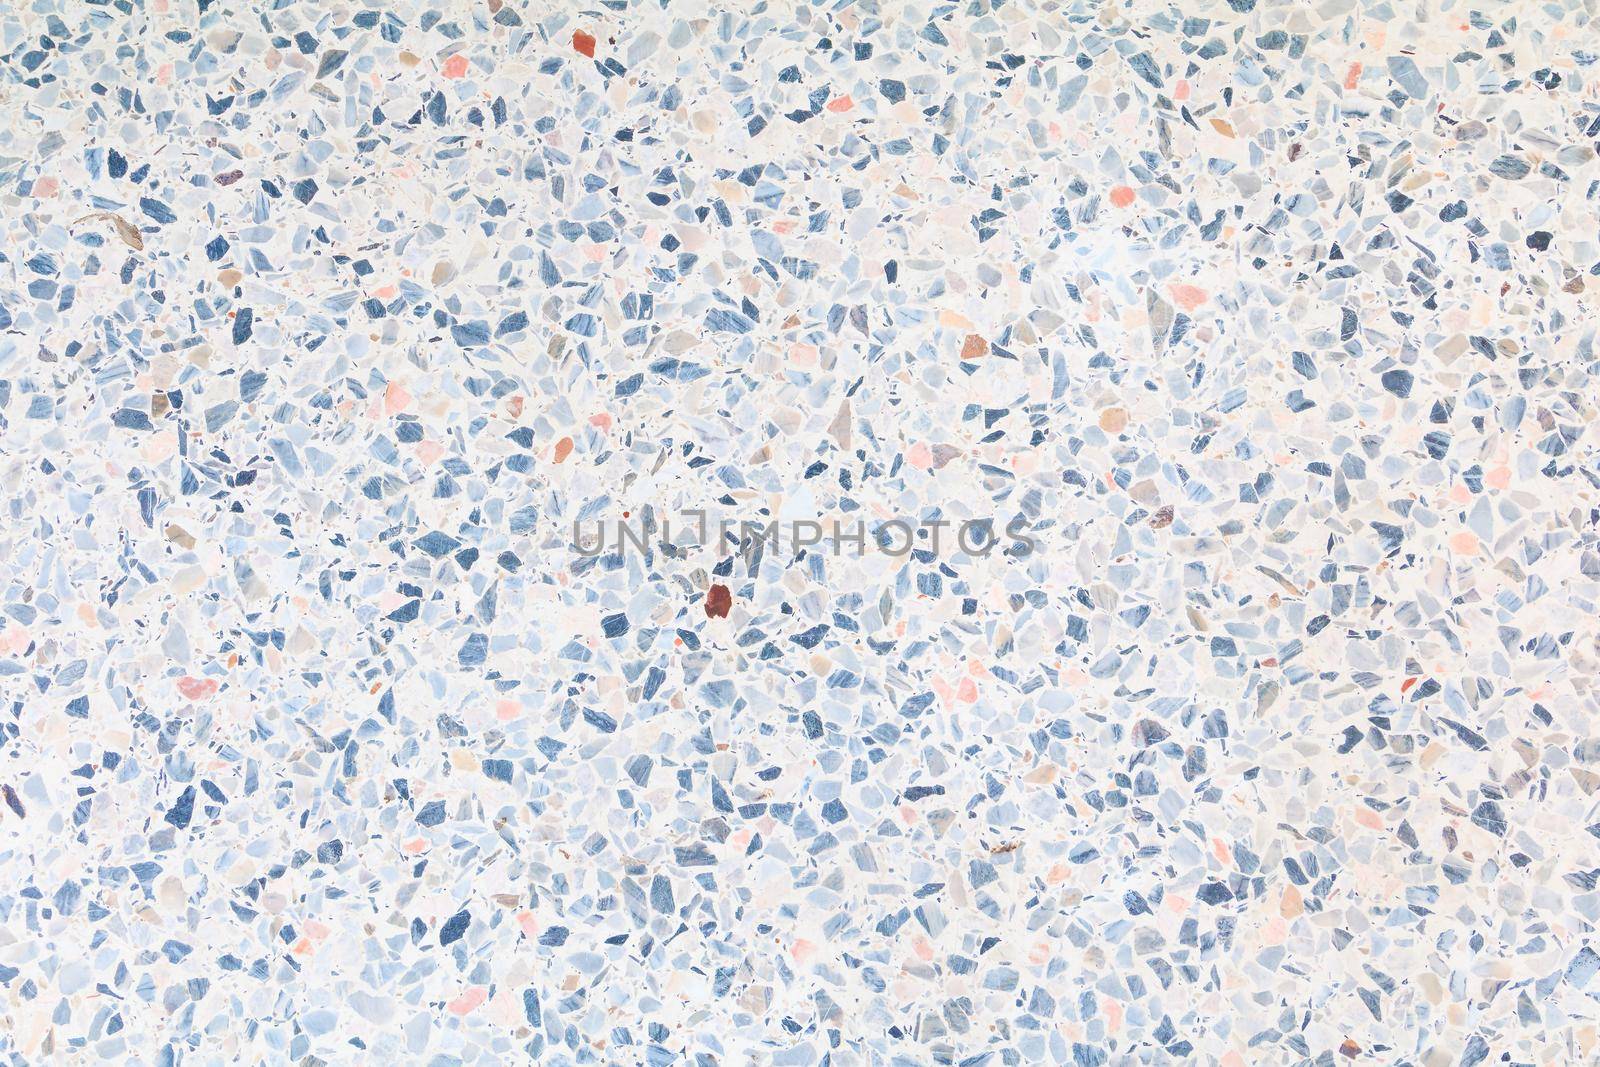 terrazzo flooring old texture or polished stone for background pattern and color beautiful